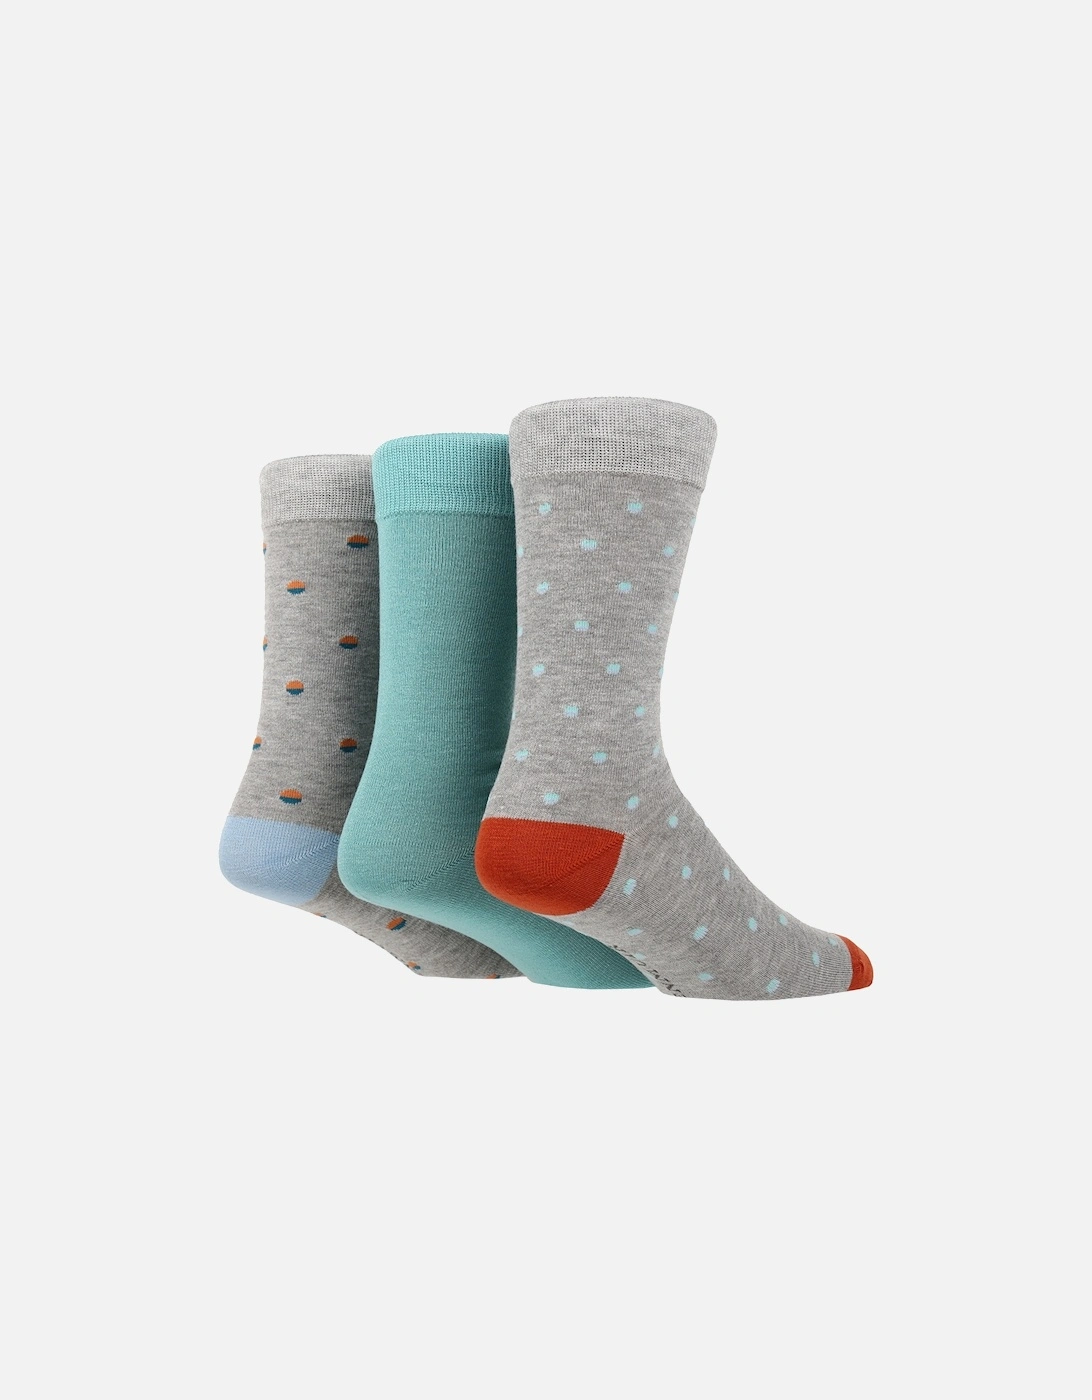 3 PAIR MENS BAMBOO SOCKS WITH SPOTS, 2 of 1